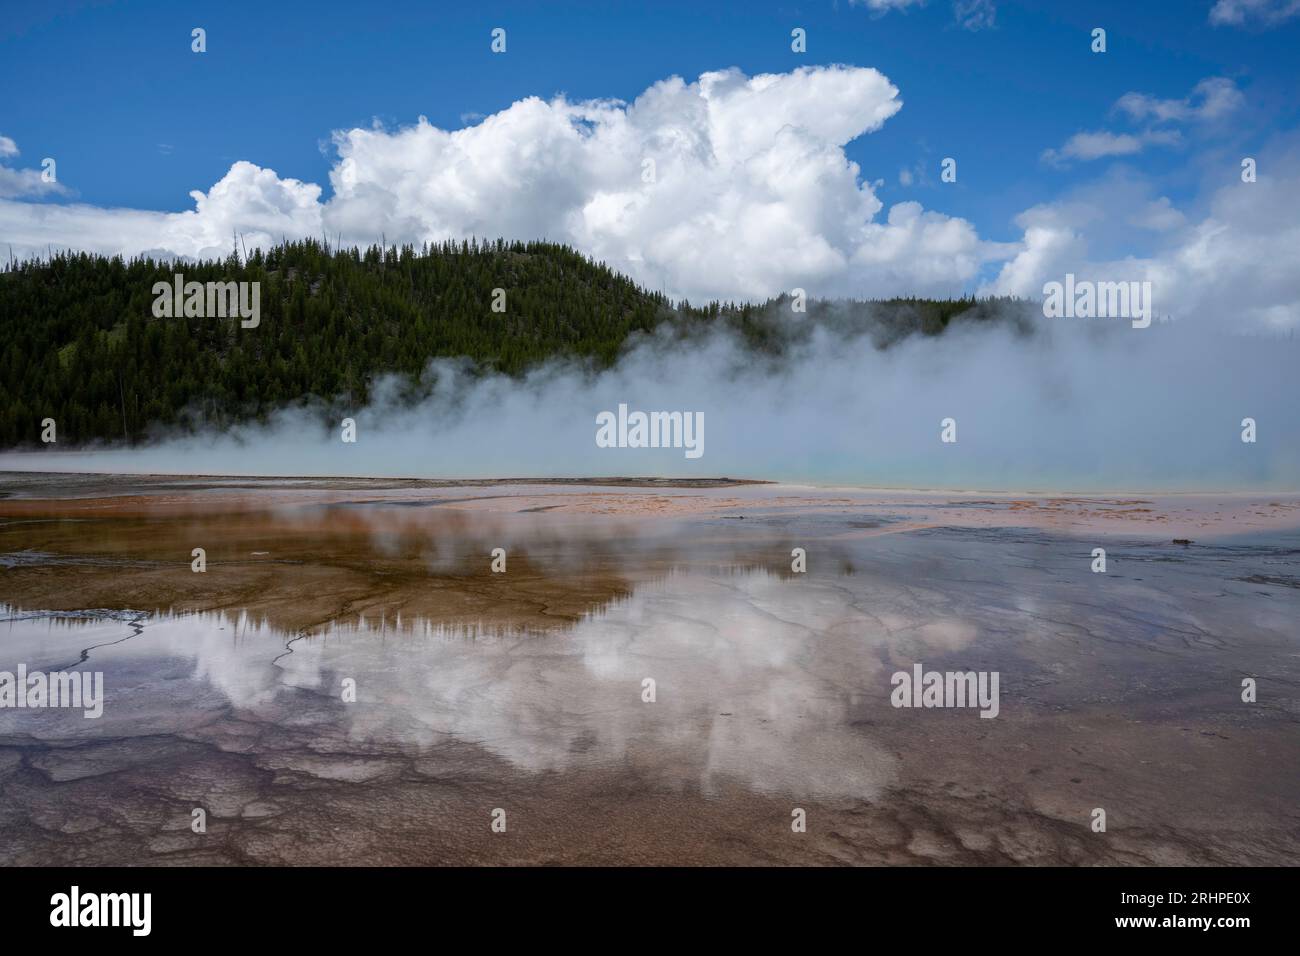 Excelsior Geyser Crater.  Grand Prismatic Spring at Yellowstone’s Midway Geyser Basin. Wyoming, USA Stock Photo